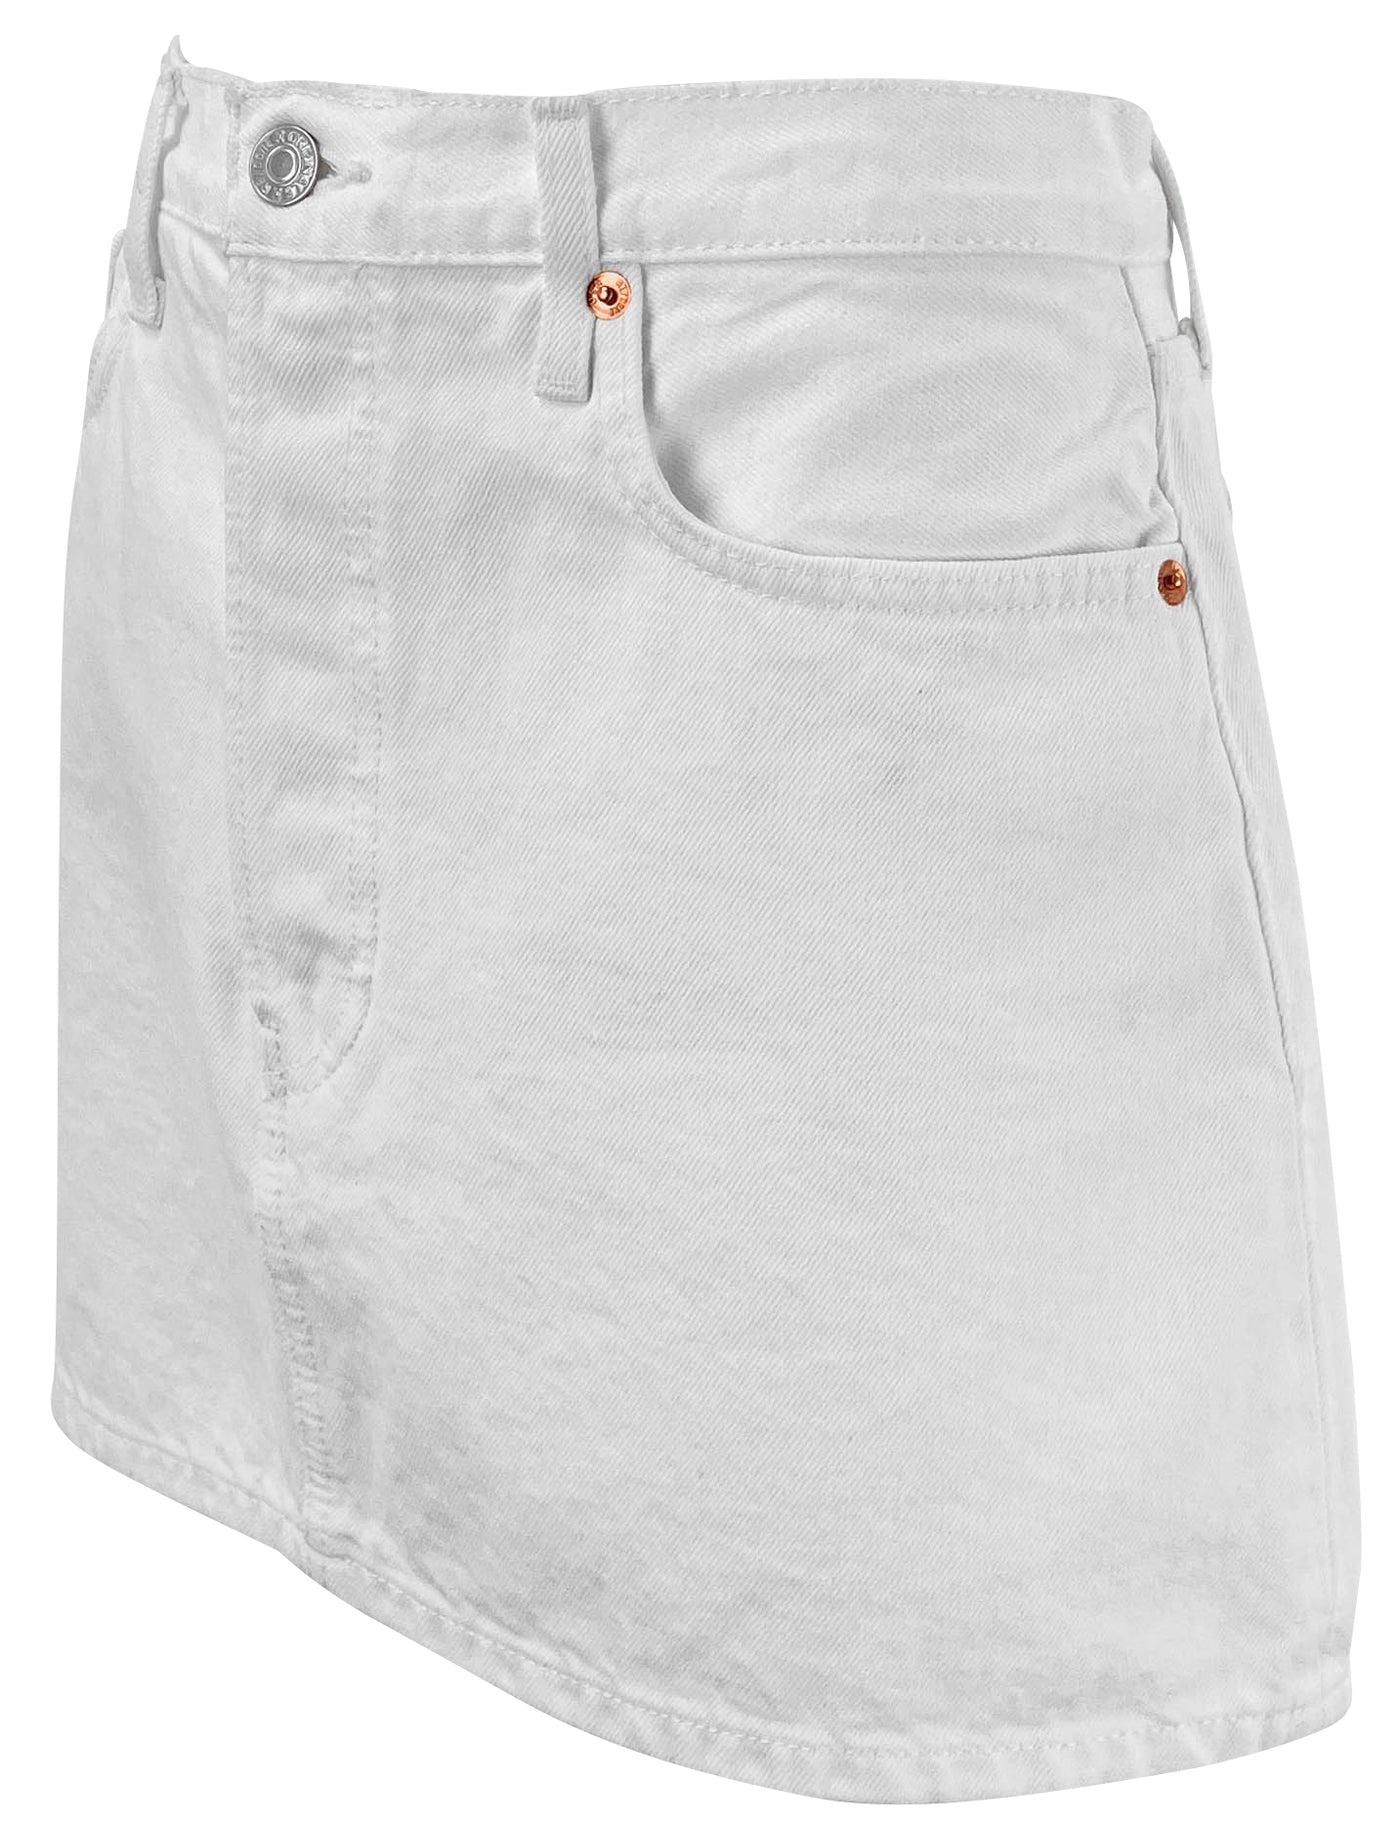 RE/DONE 90's Denim Mini Skirt in White - Discounts on RE/DONE at UAL